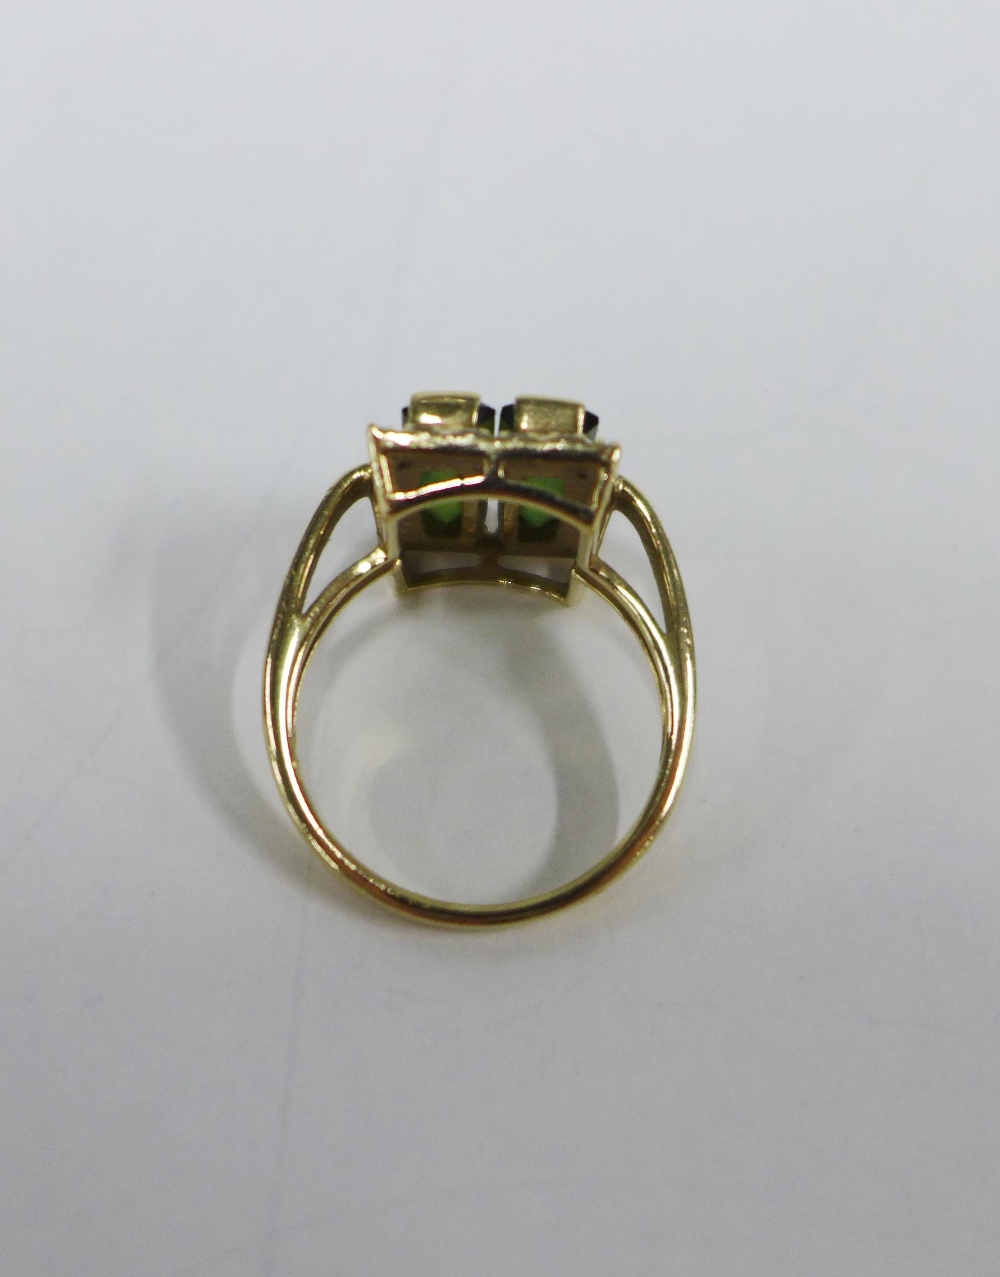 9ct gold dress ring with two emerald cut green stone within a surround of claw set diamonds - Image 3 of 4